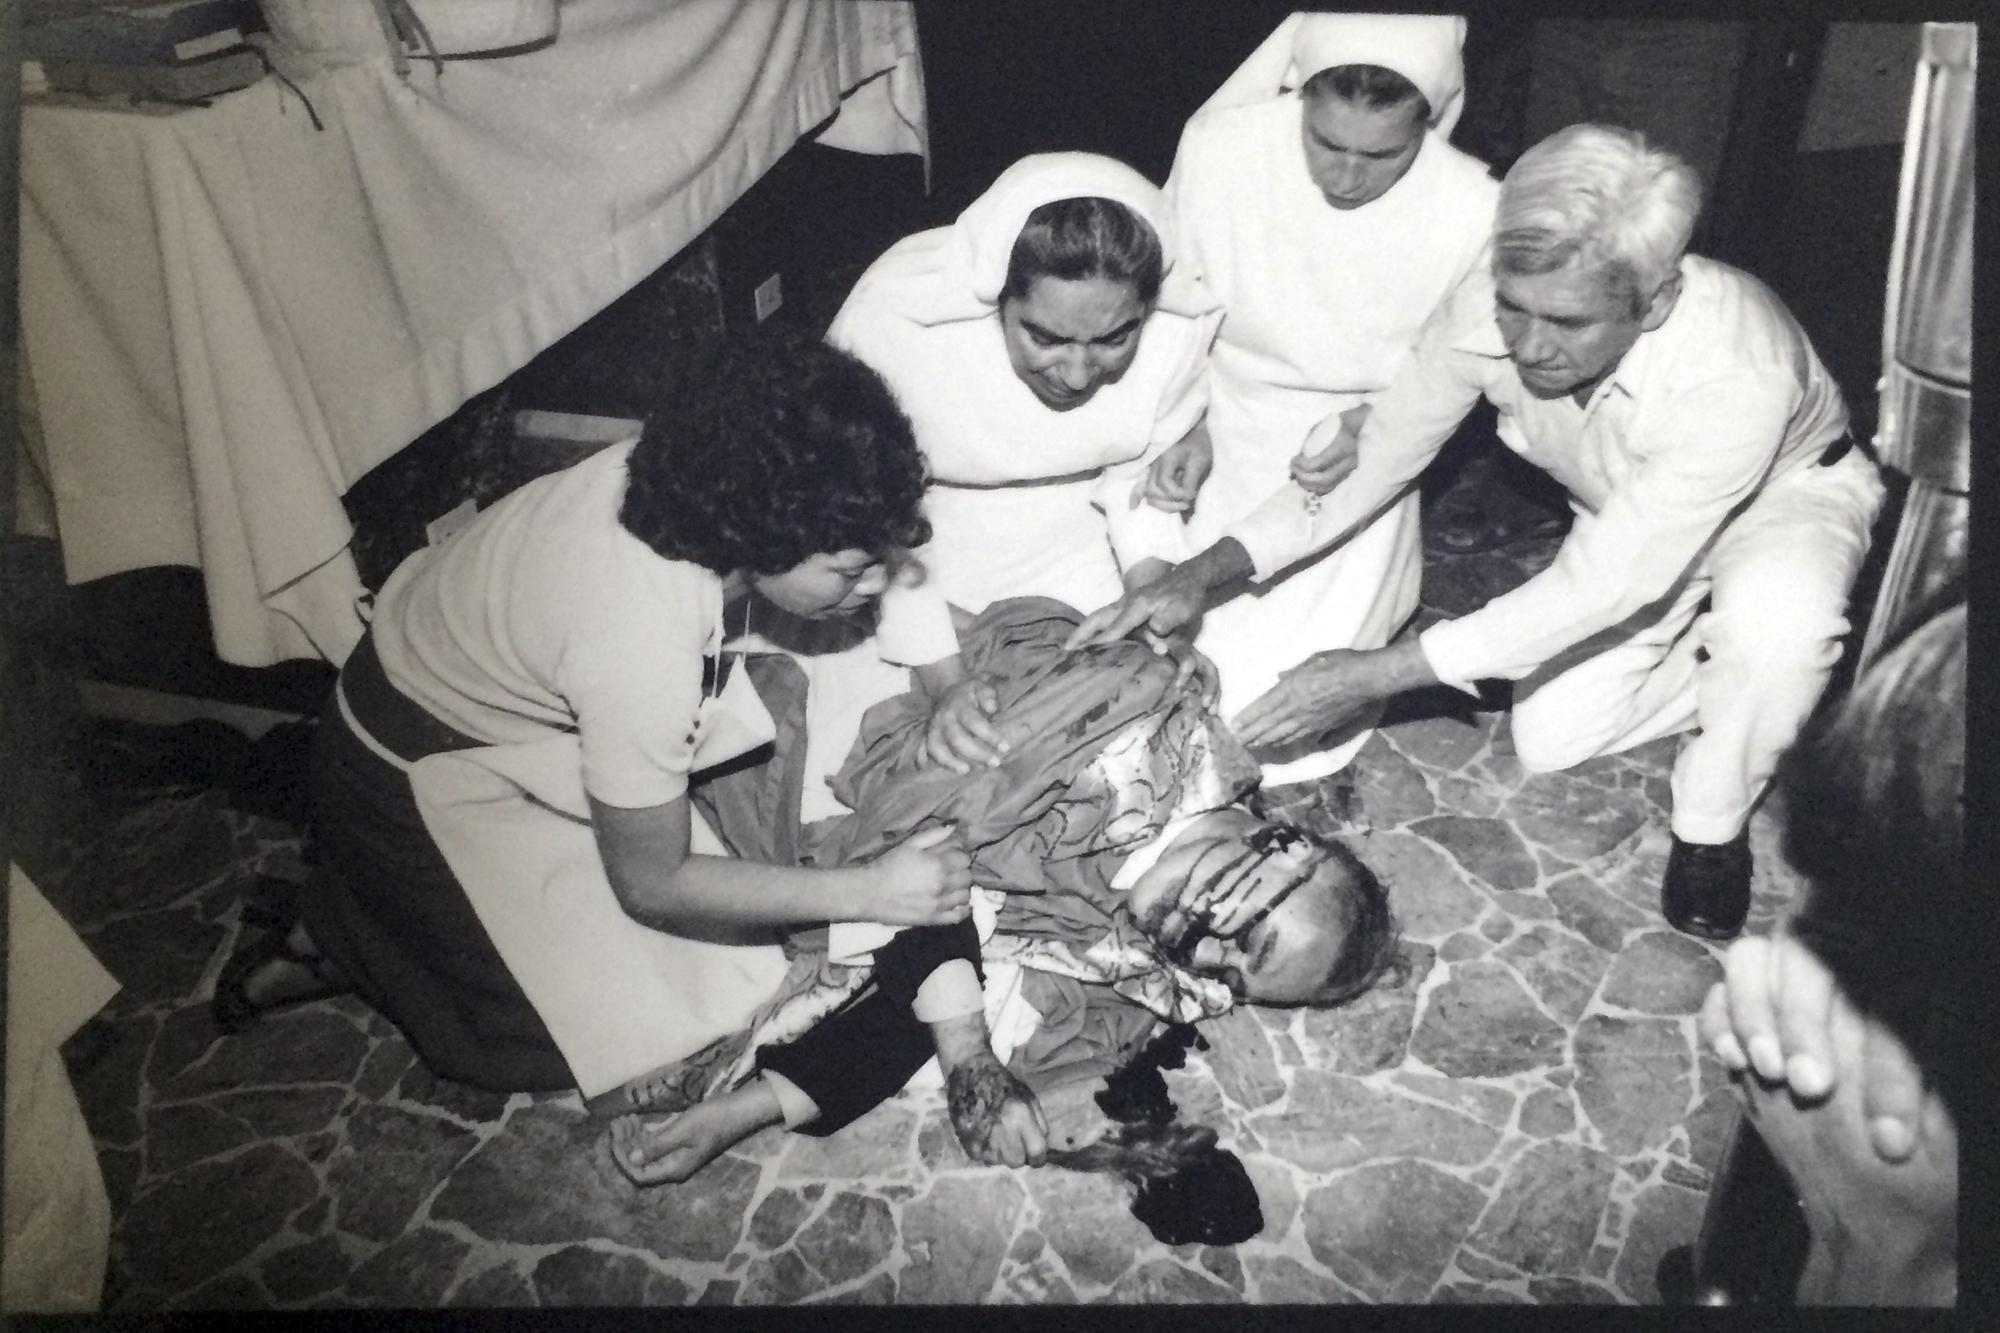 Photograph of the assassination of Monseñor Romero, March 24, 1980, in the chapel of Divine Providence Hospital, San Salvador.  From the archive of photographer Eulalio Pérez.